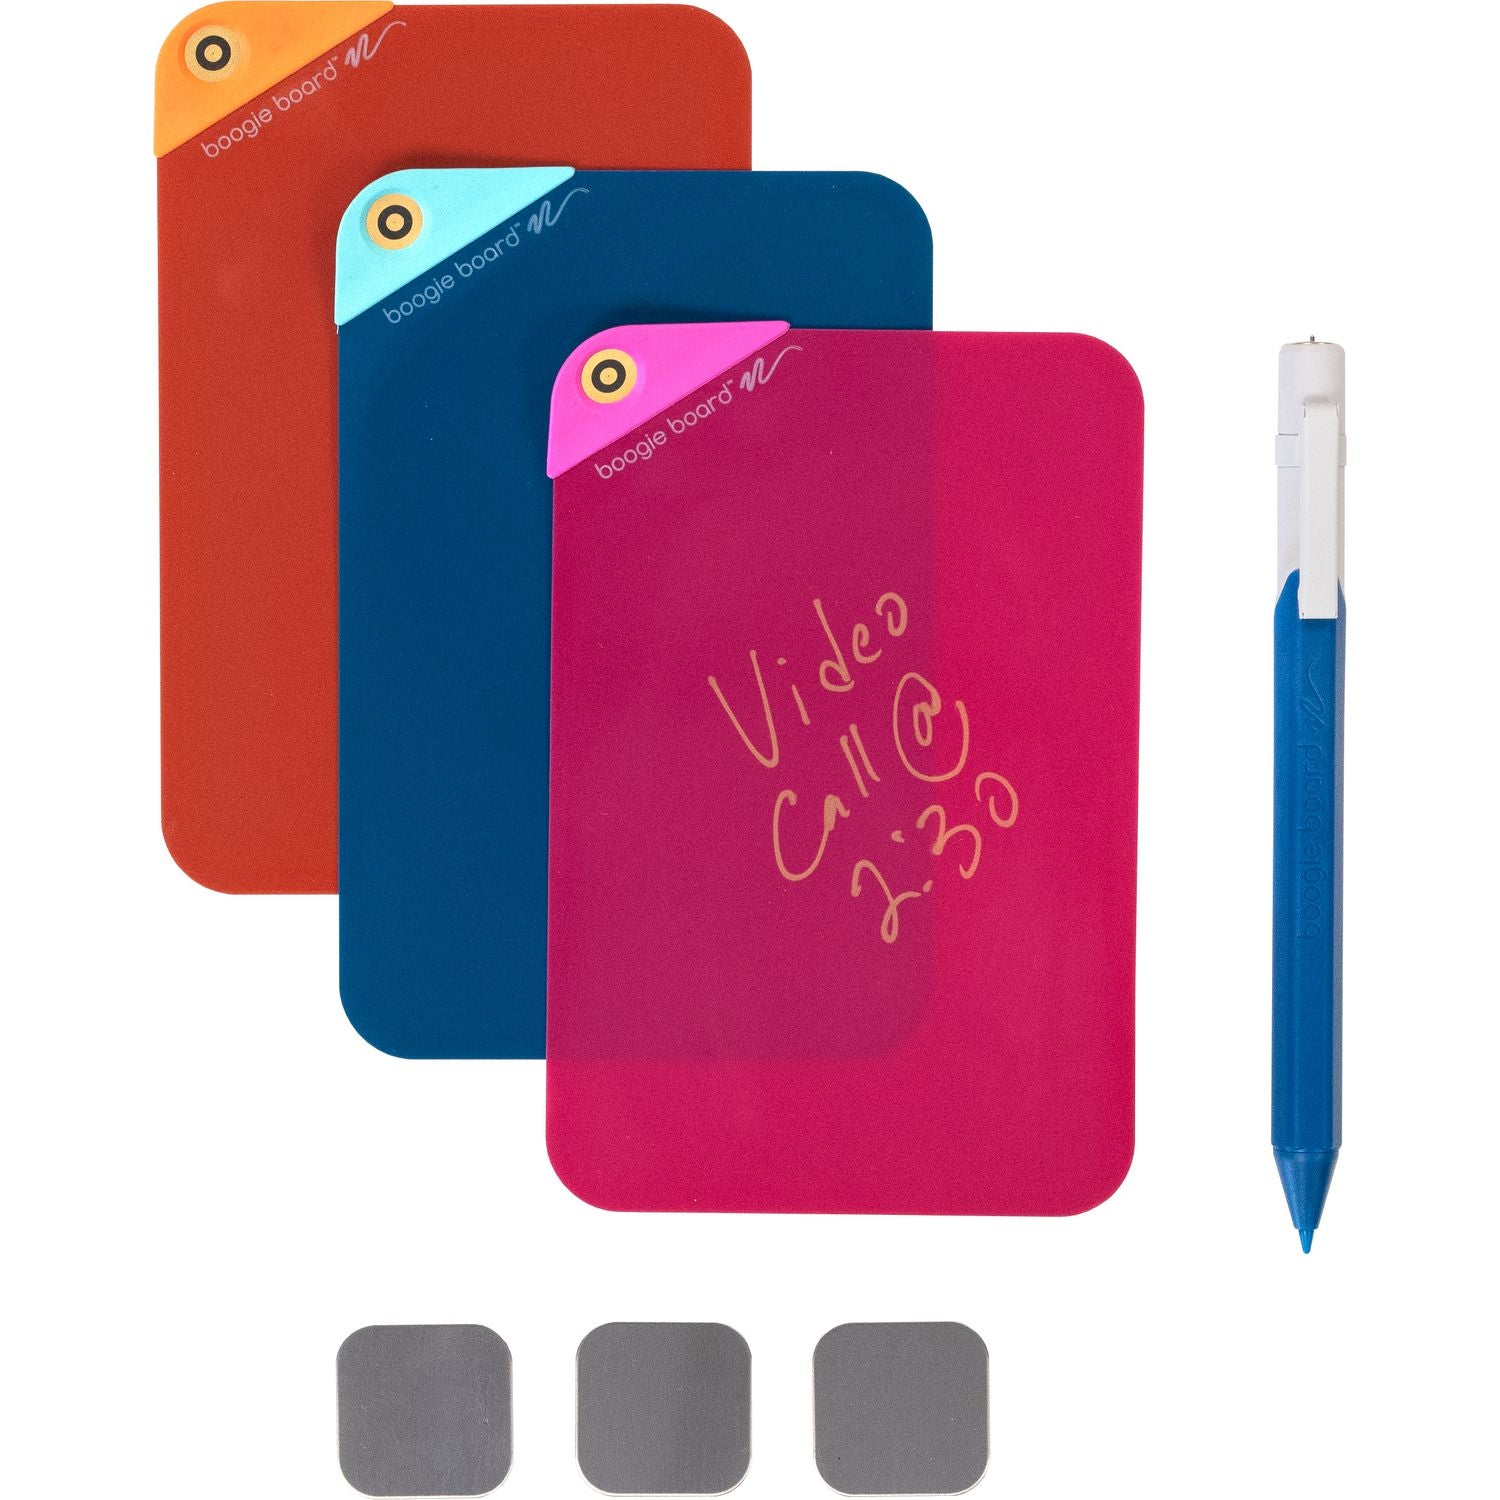 versanotes-starter-pack-reusable-notes-4-x-6-three-assorted-color-notes-plus-pen_imvvn20m60001 - 1